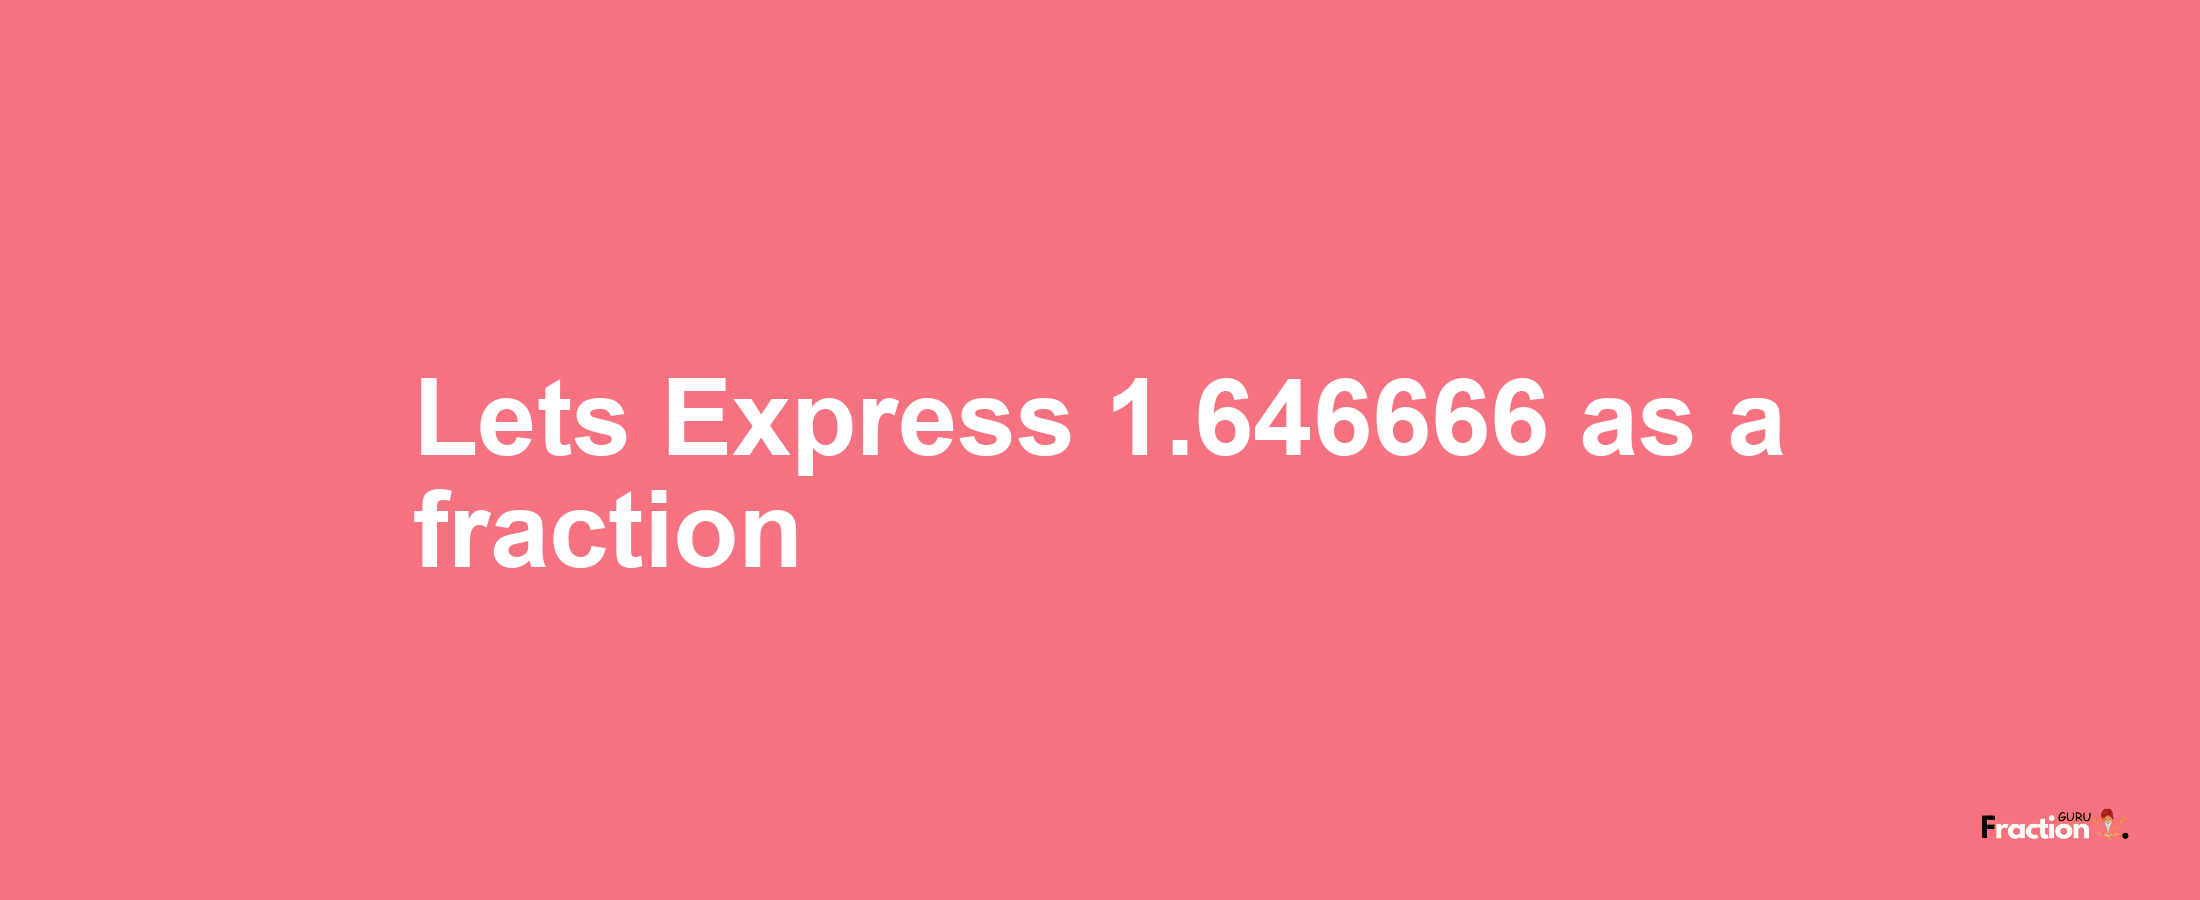 Lets Express 1.646666 as afraction